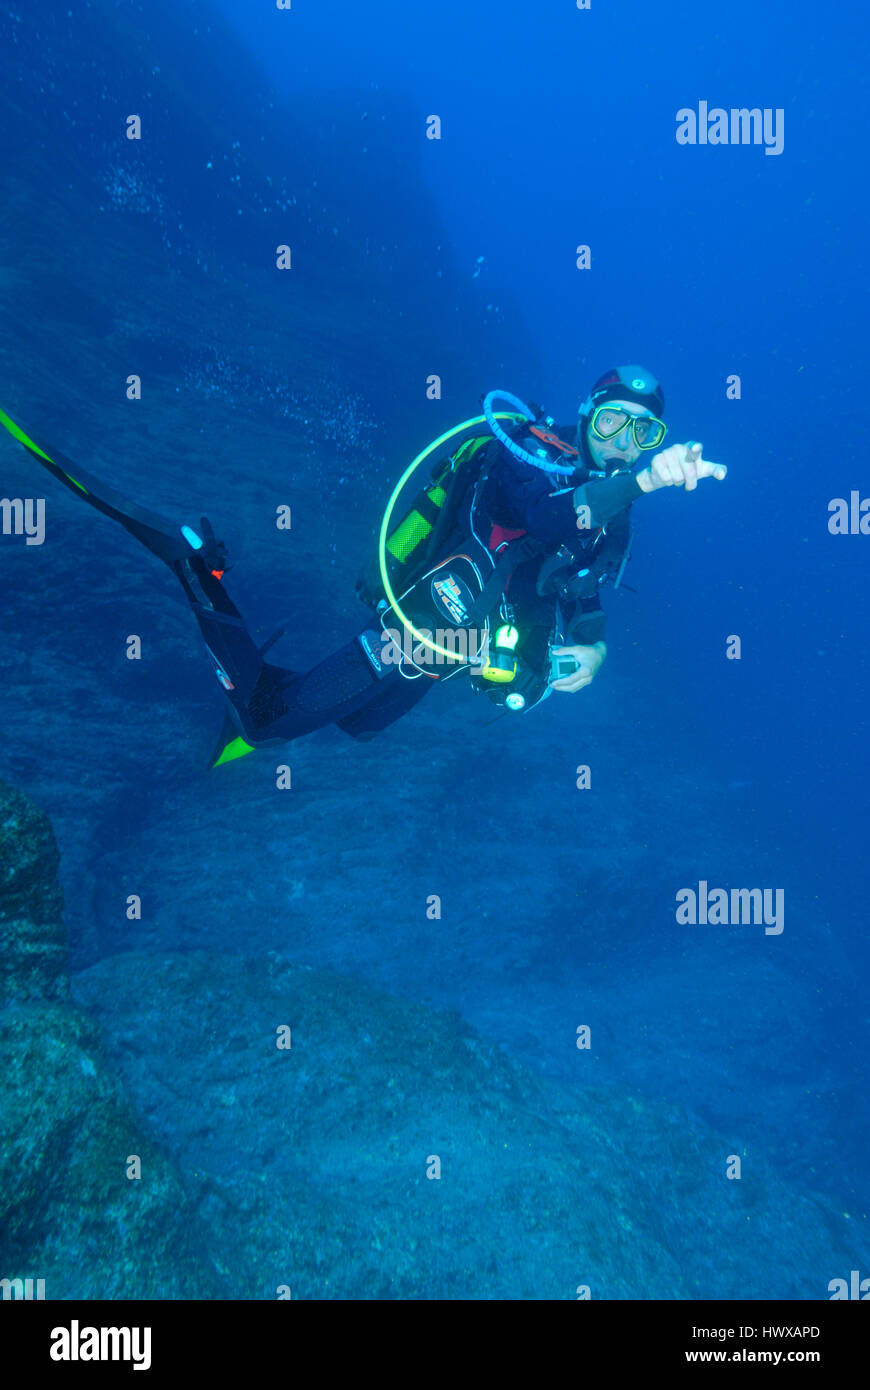 Scuba diver hanging midwater above rocky seabed Stock Photo